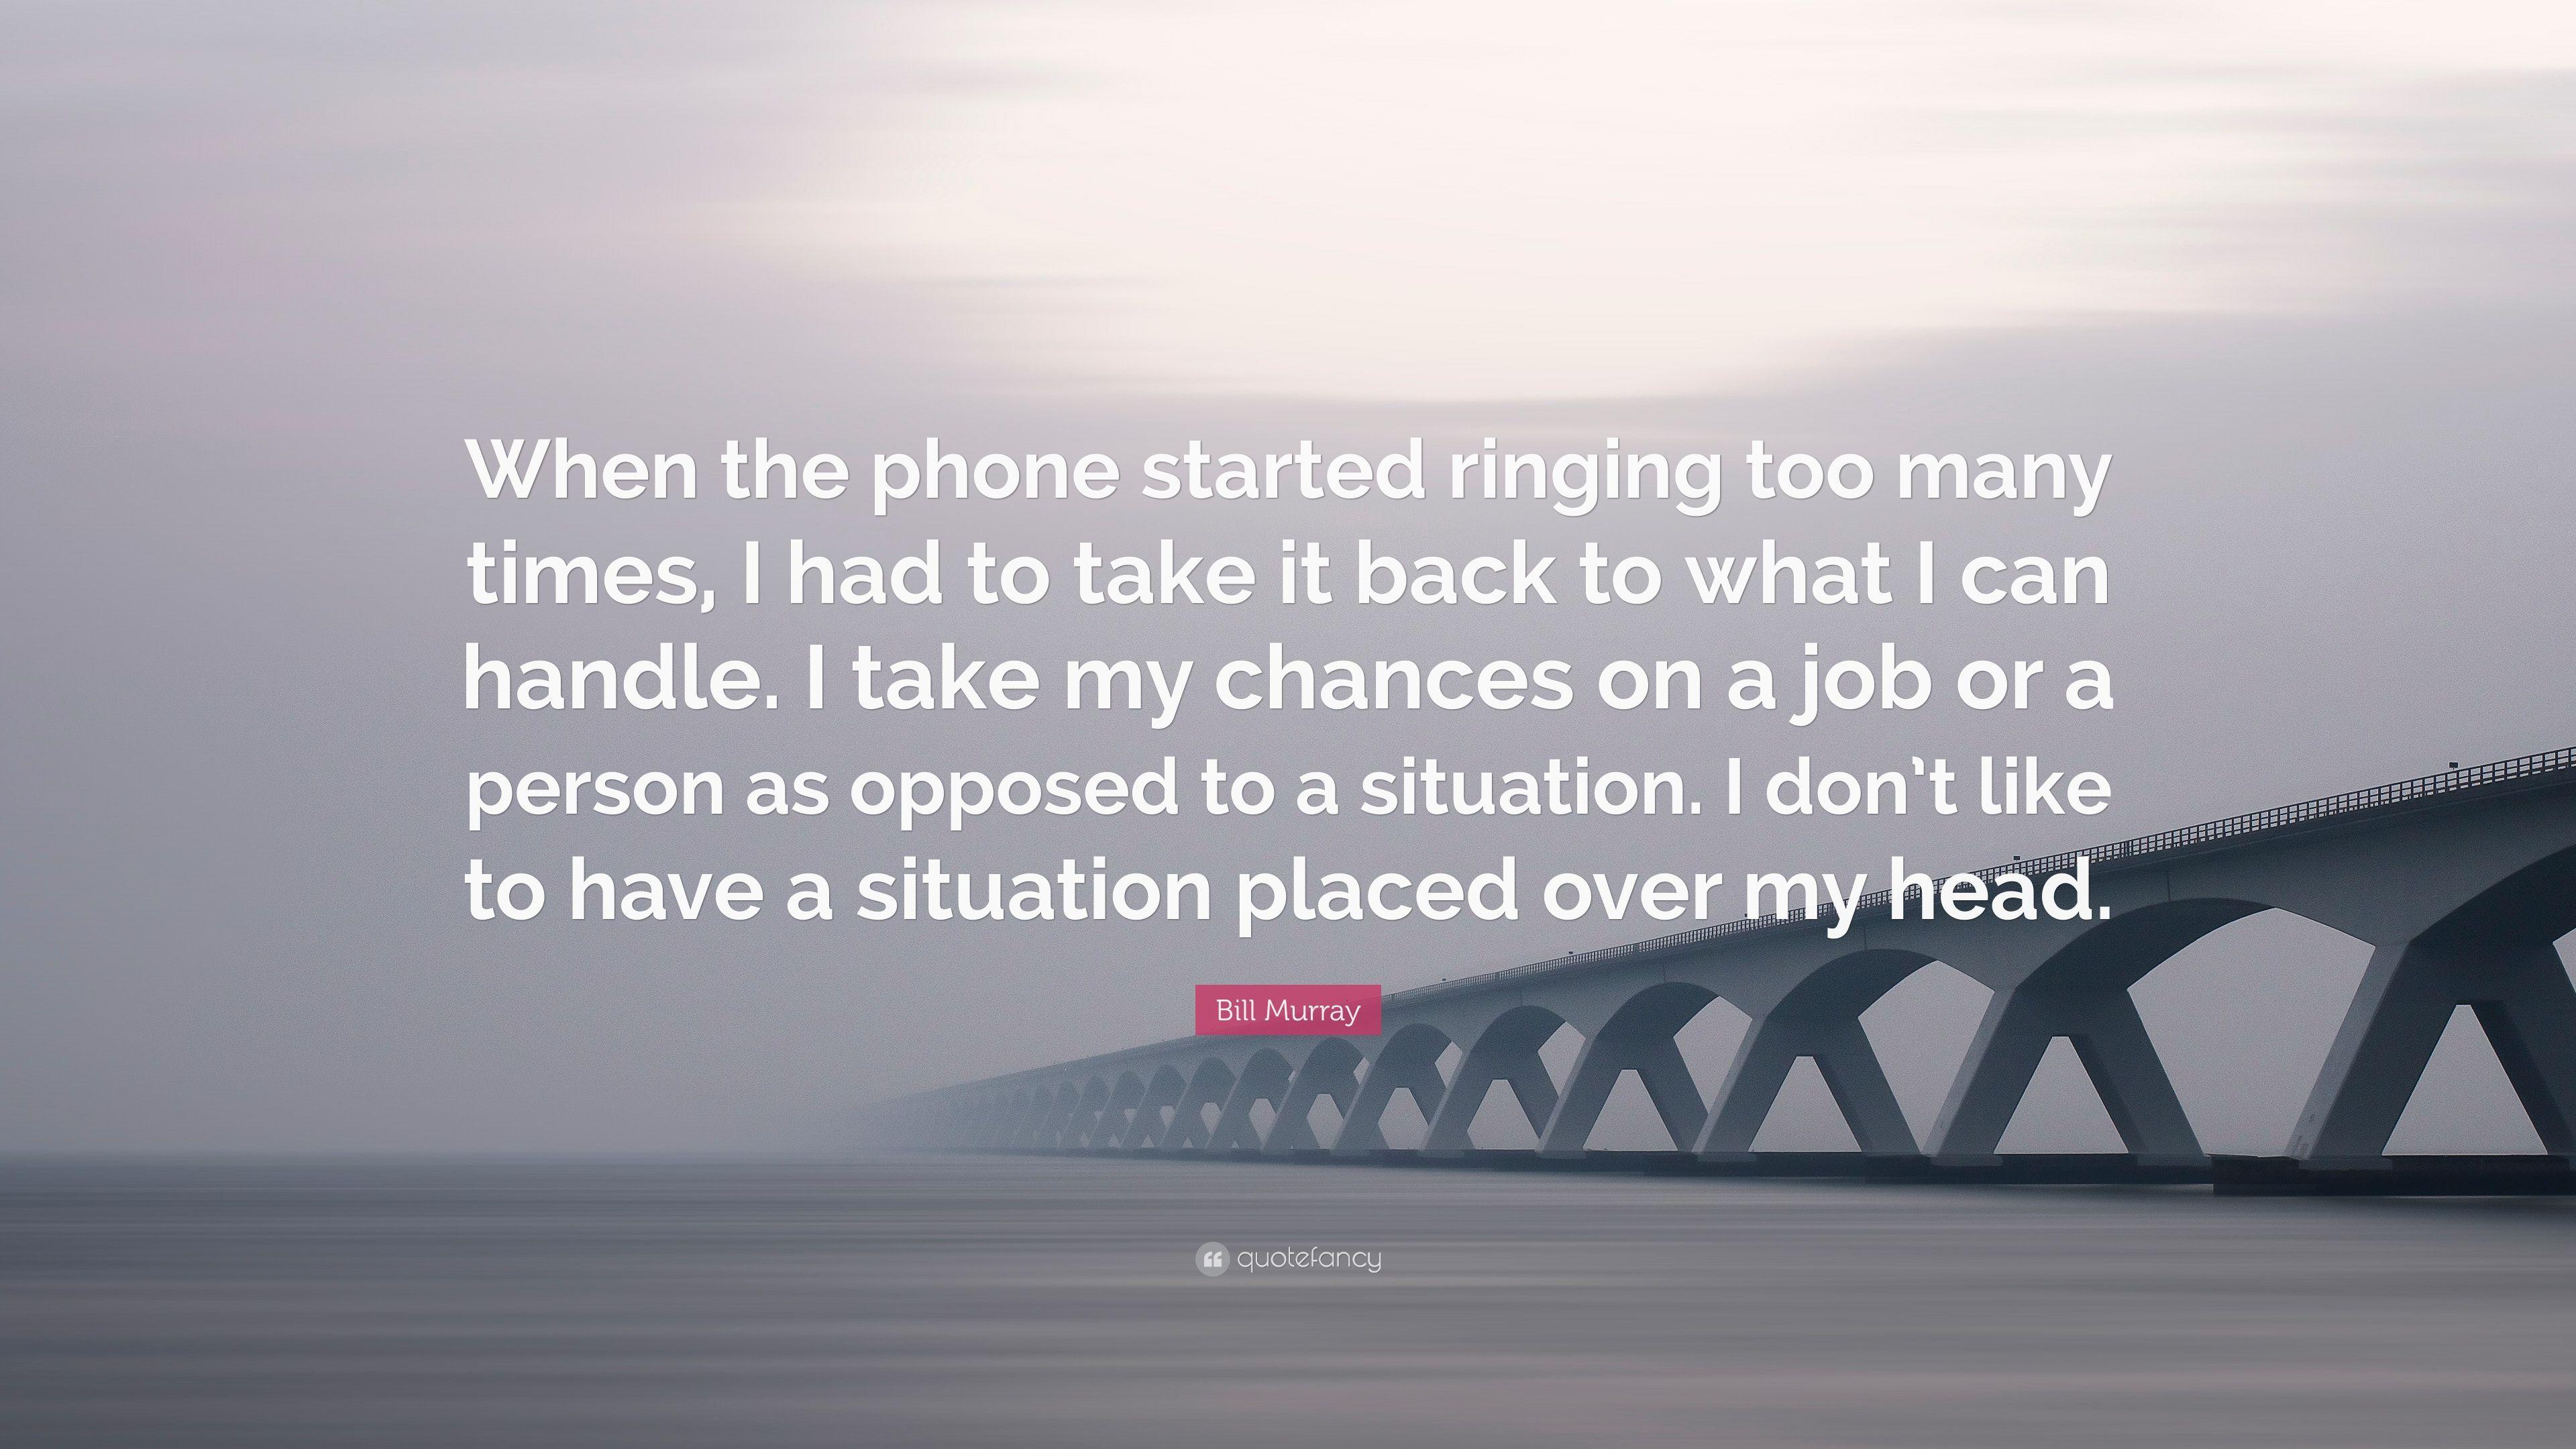 Bill Murray Quote: “When the phone started ringing too many times